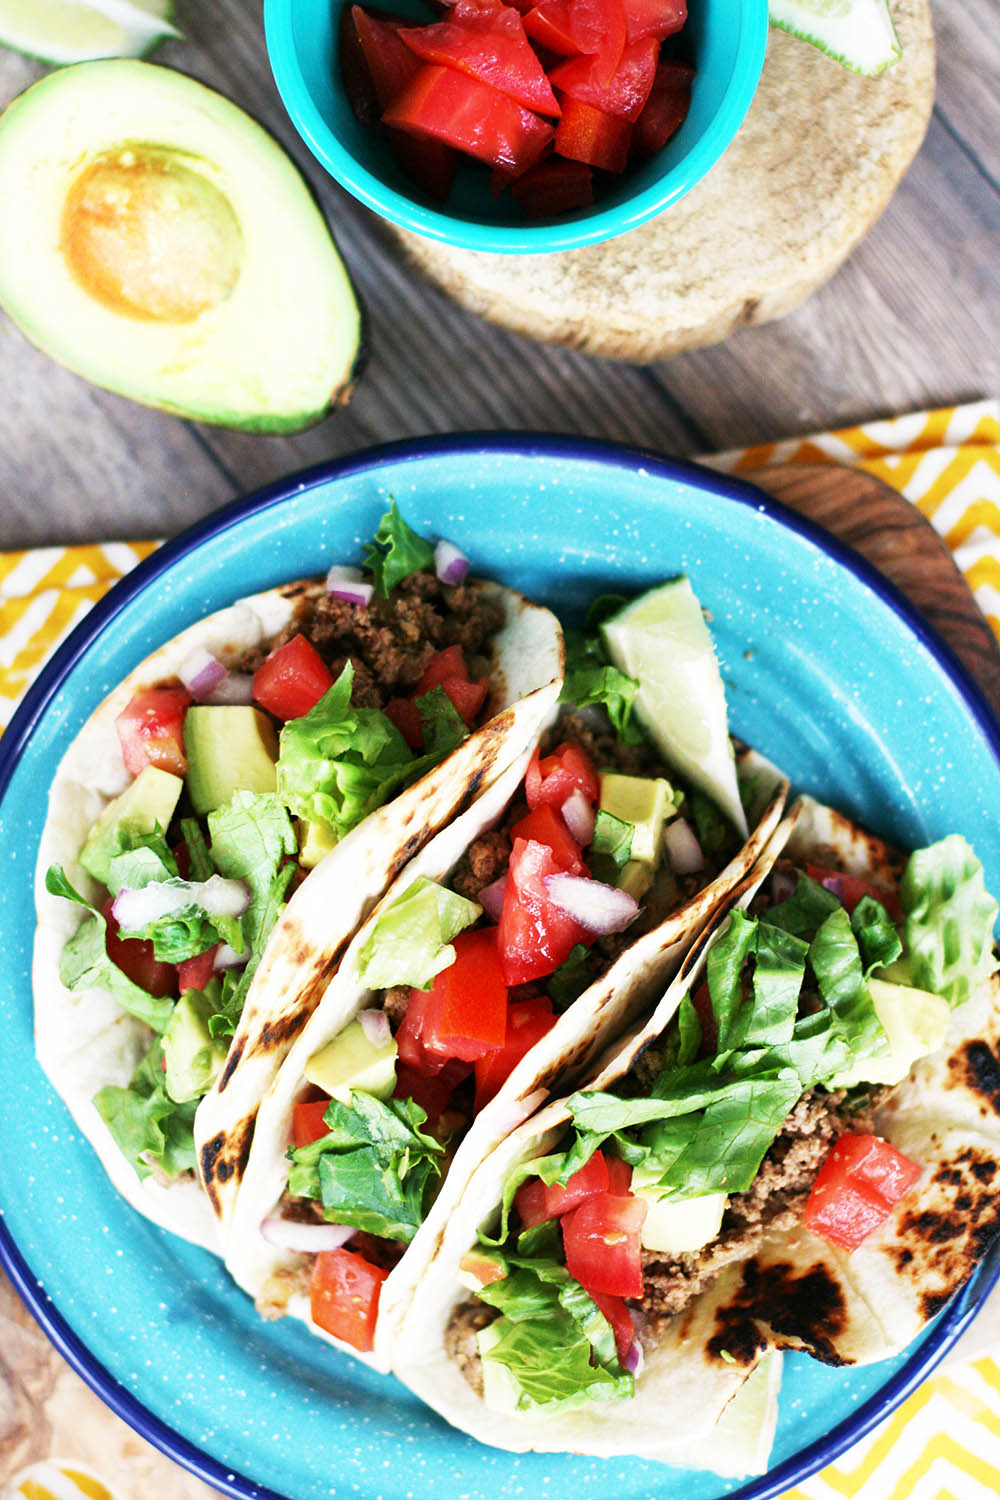 Ground turkey tacos: Flavorful ground turkey with Mexican spices. Pile on the toppings!